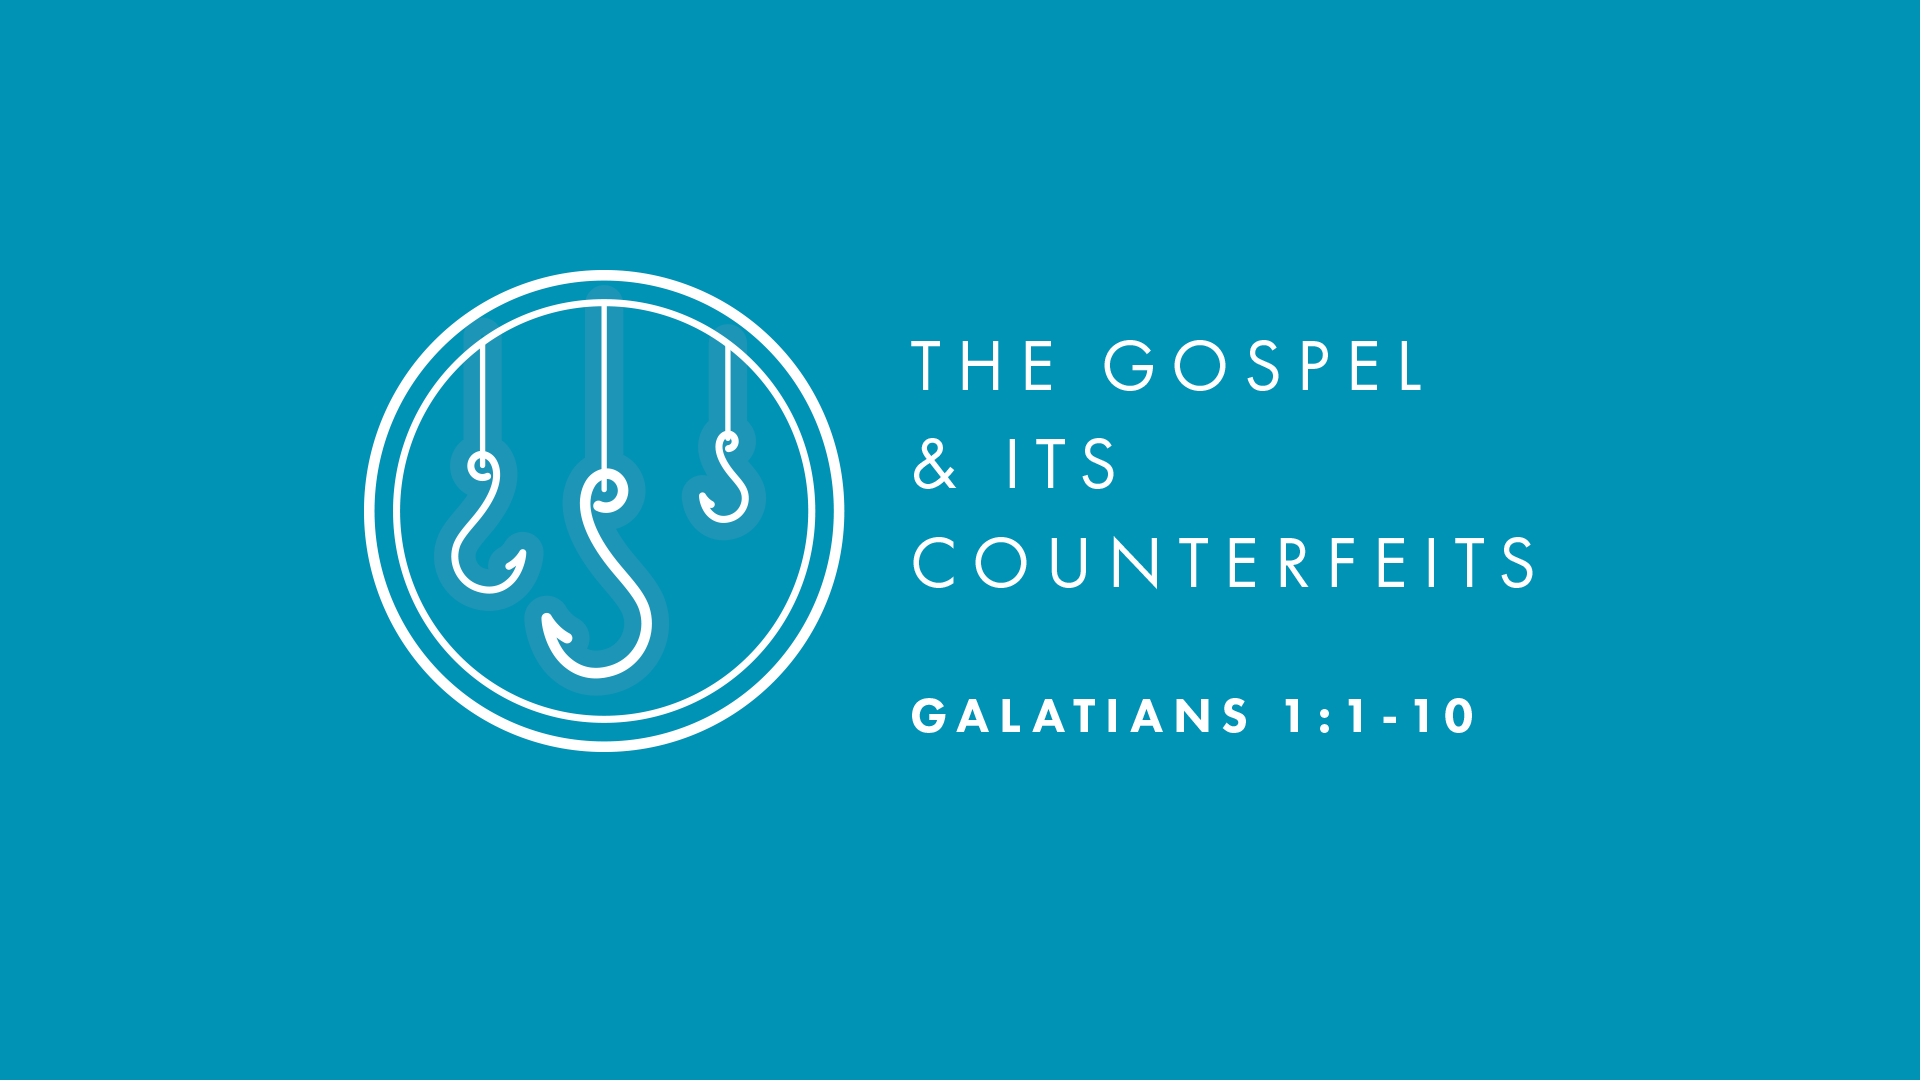 The Gospel and Its Counterfeits